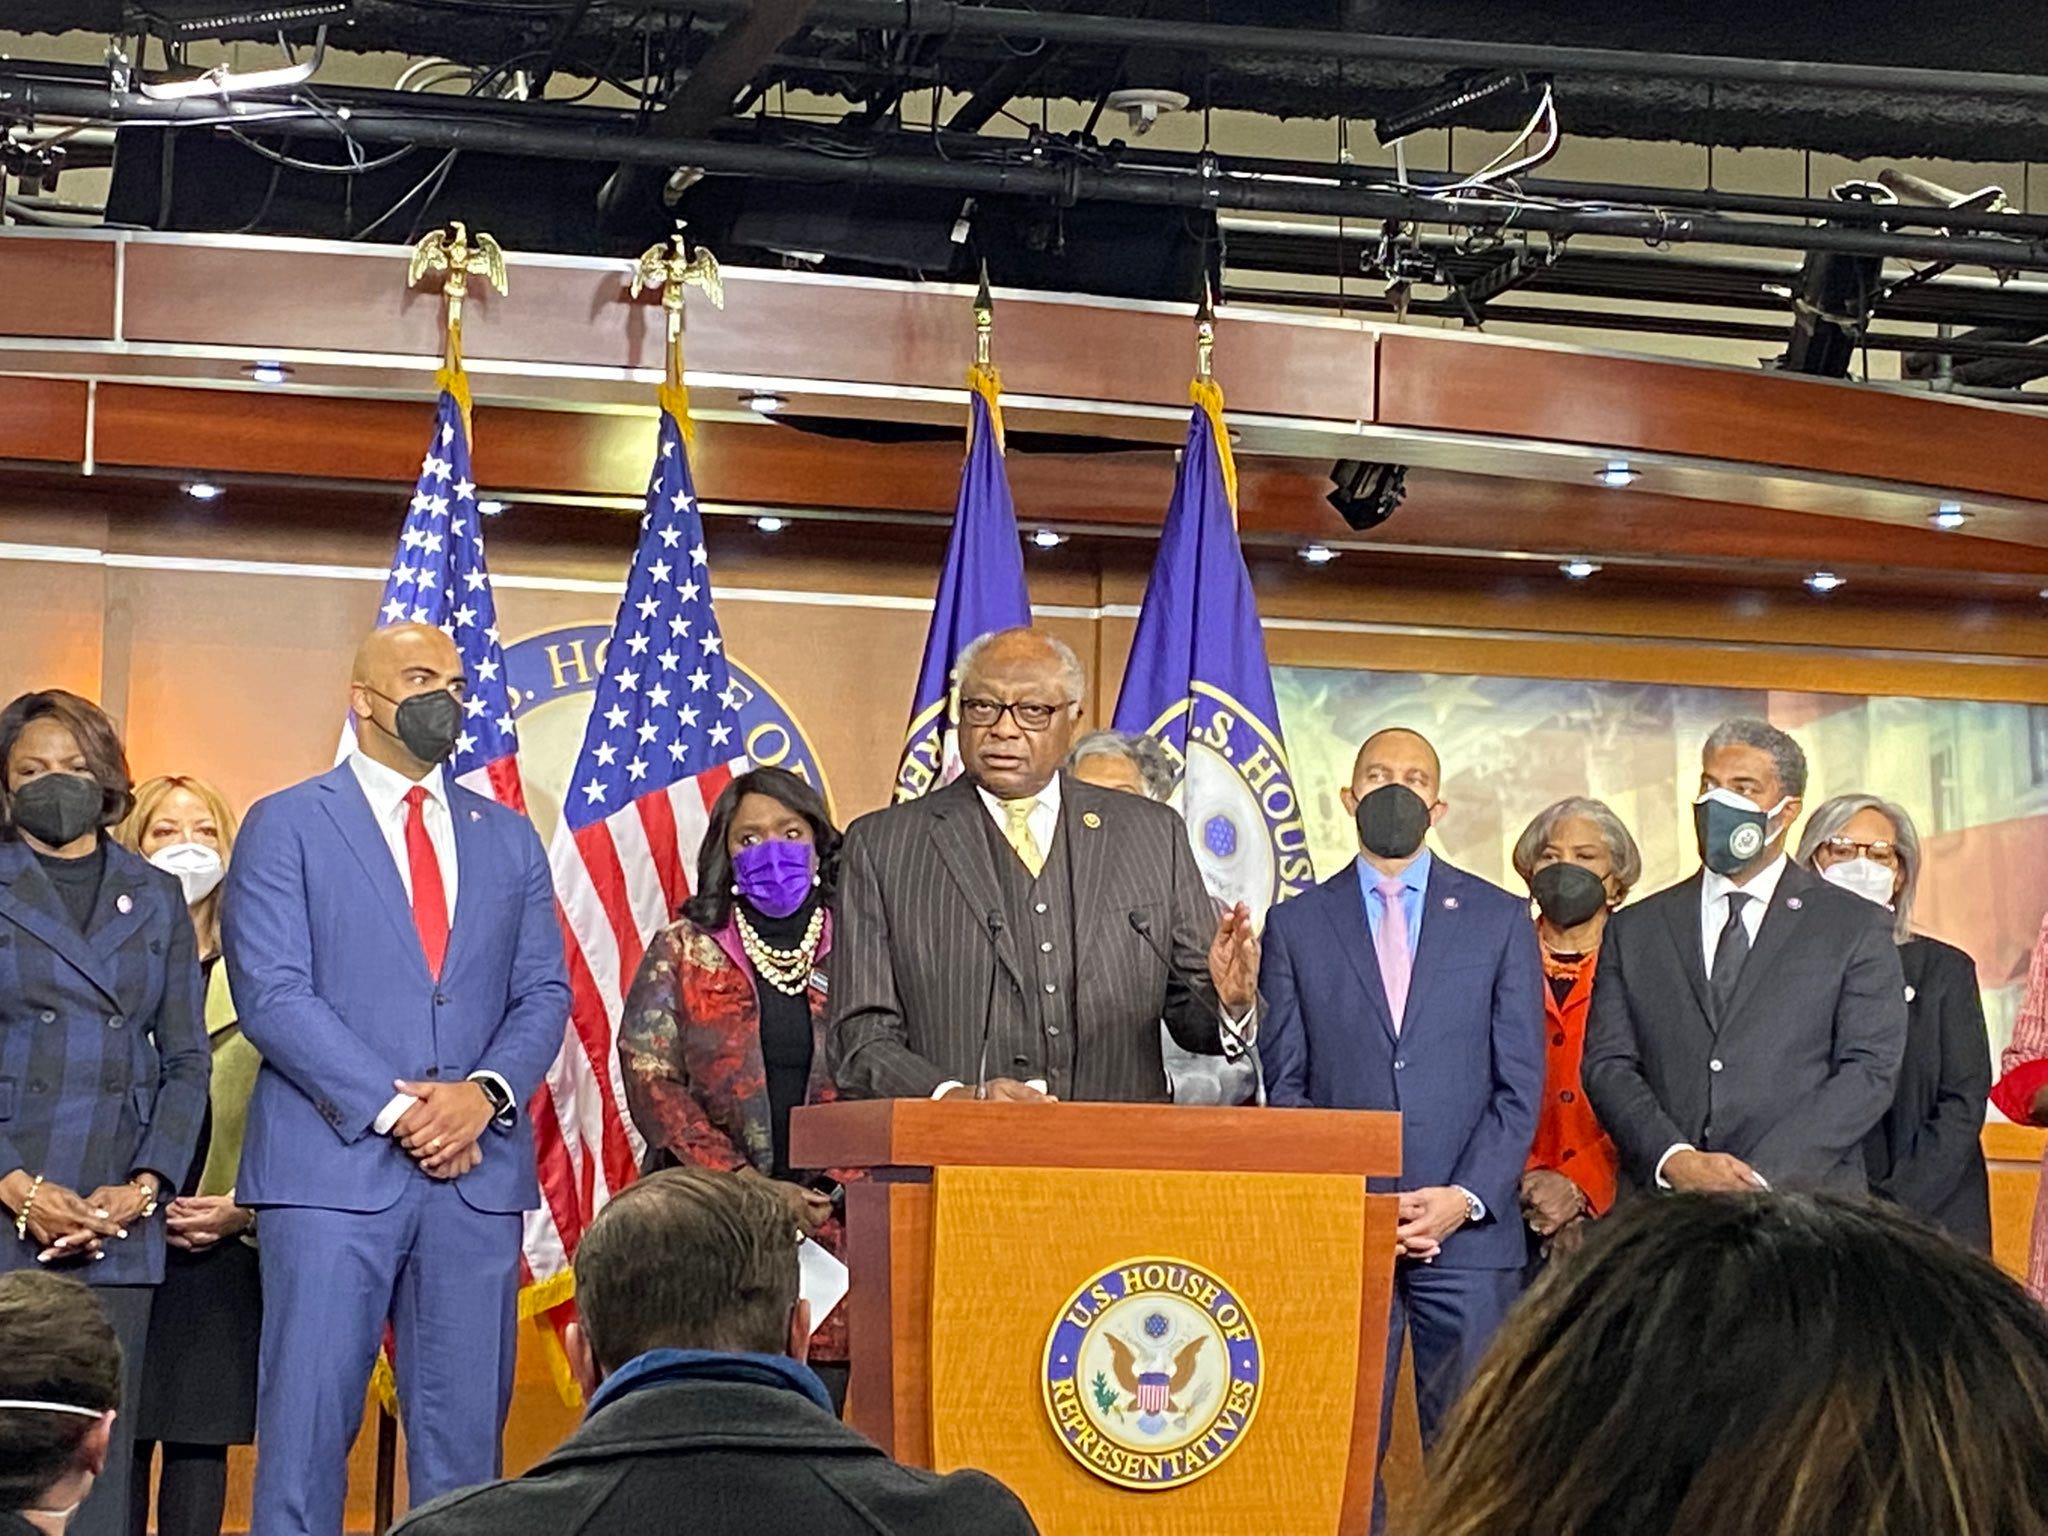 Black Caucus calls on Senate to ditch filibuster, pass elections bills immediately: 'It's the urgency of now'